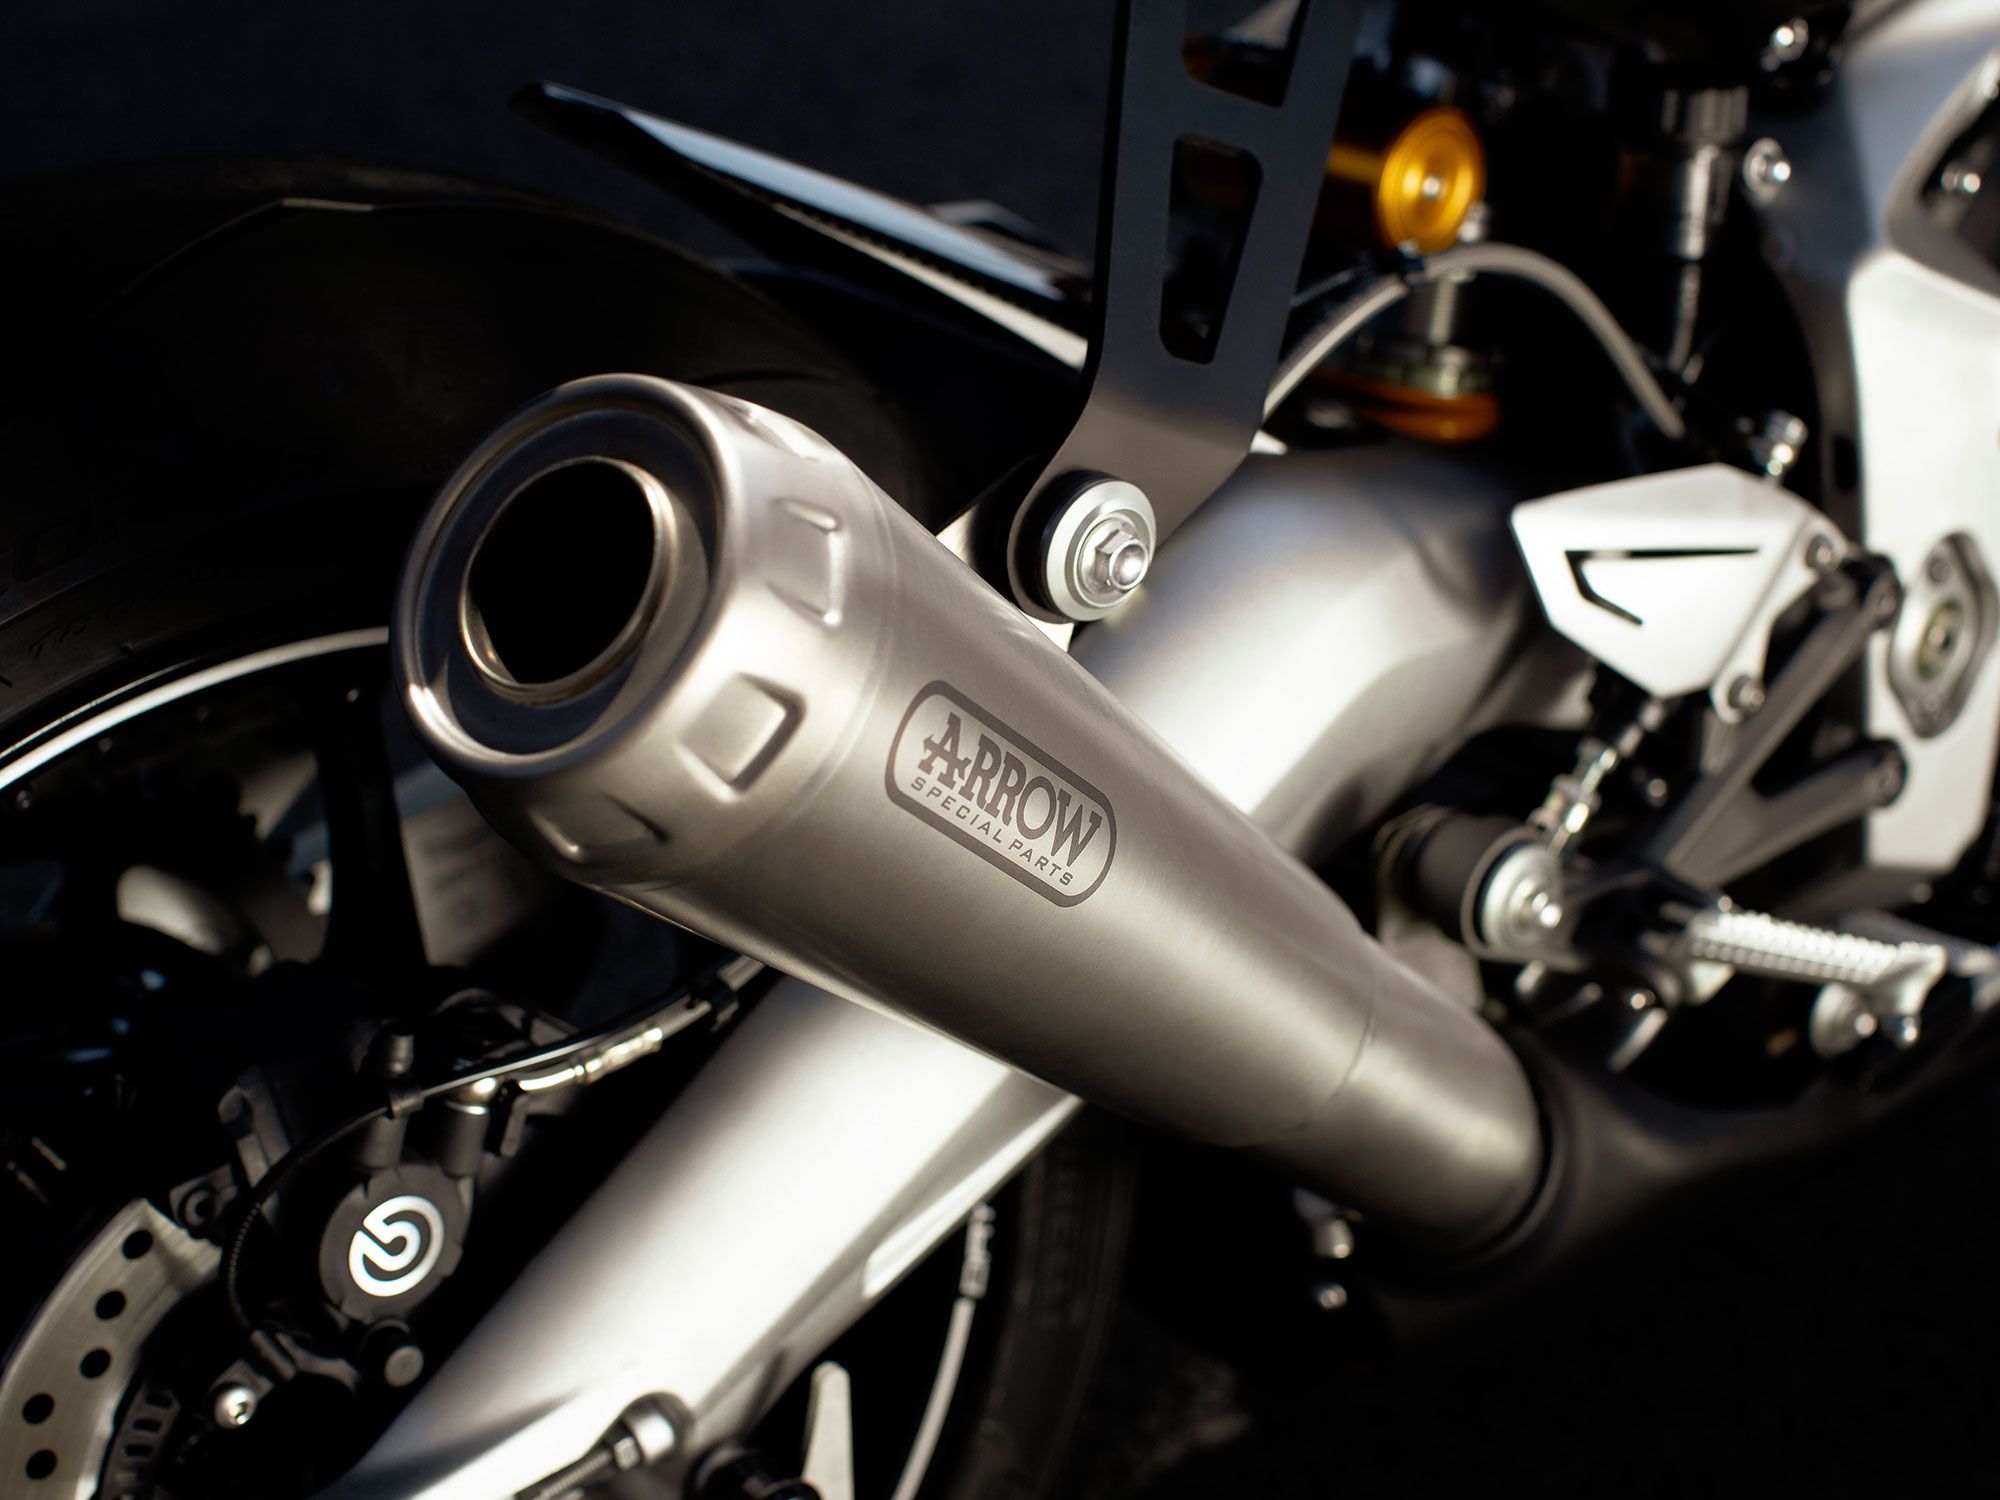 We love the charismatic and fun-loving howl that Triumph’s I3 produces. It sounds even sweeter with this titanium muffler from Arrow.